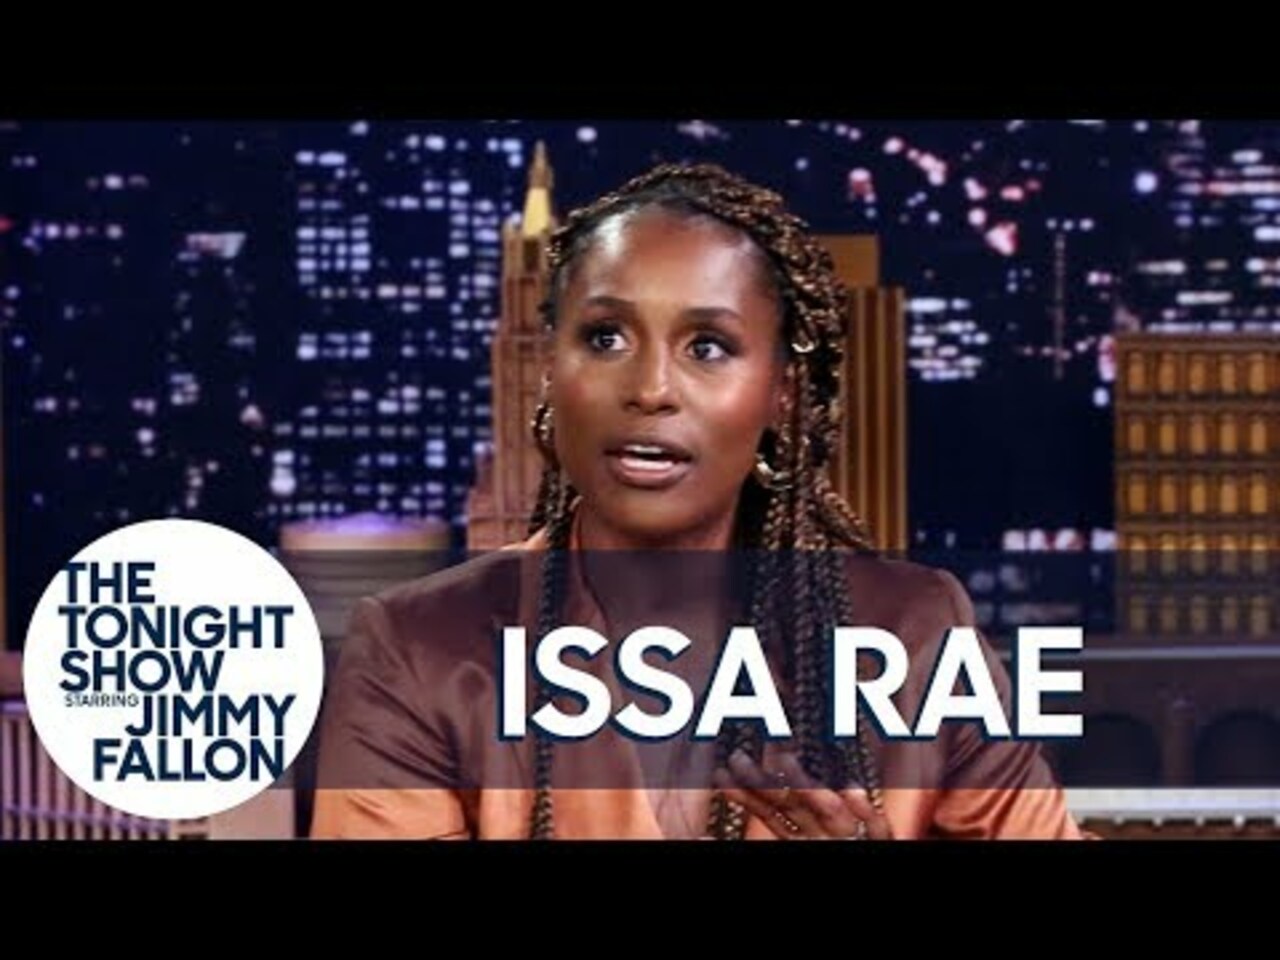 Issa Rae Accepted an Award Like a Boss Rapper Without Humility